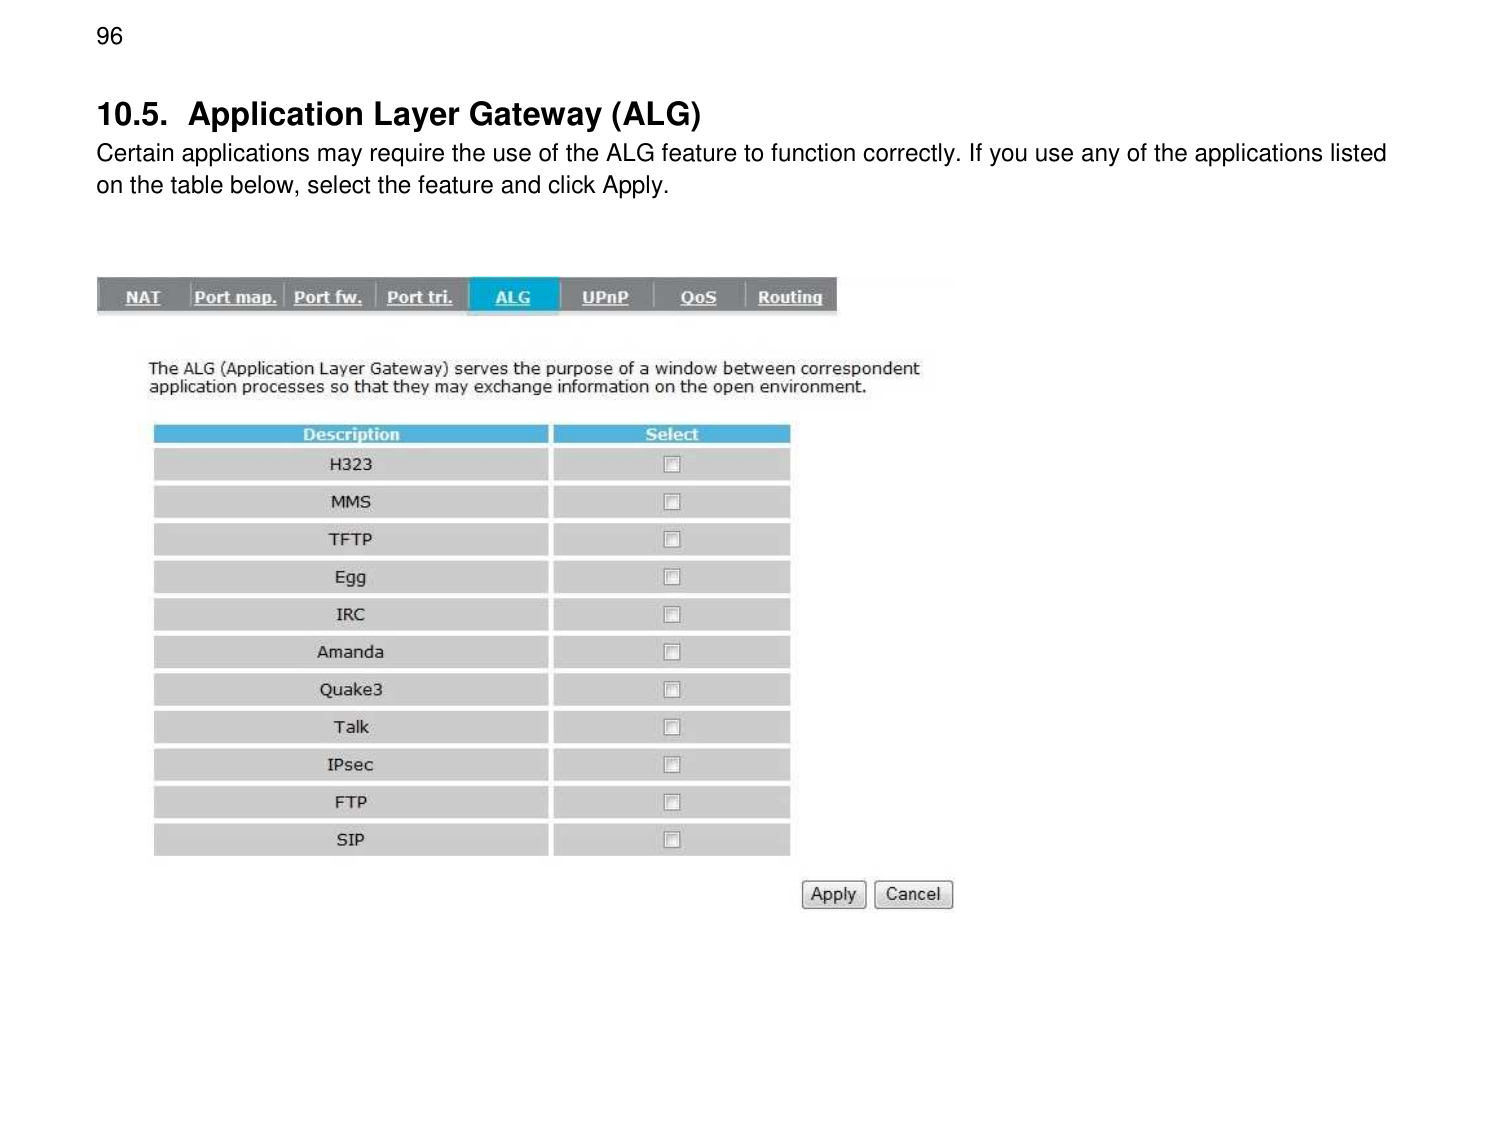  96 10.5.  Application Layer Gateway (ALG) Certain applications may require the use of the ALG feature to function correctly. If you use any of the applications listed on the table below, select the feature and click Apply.    